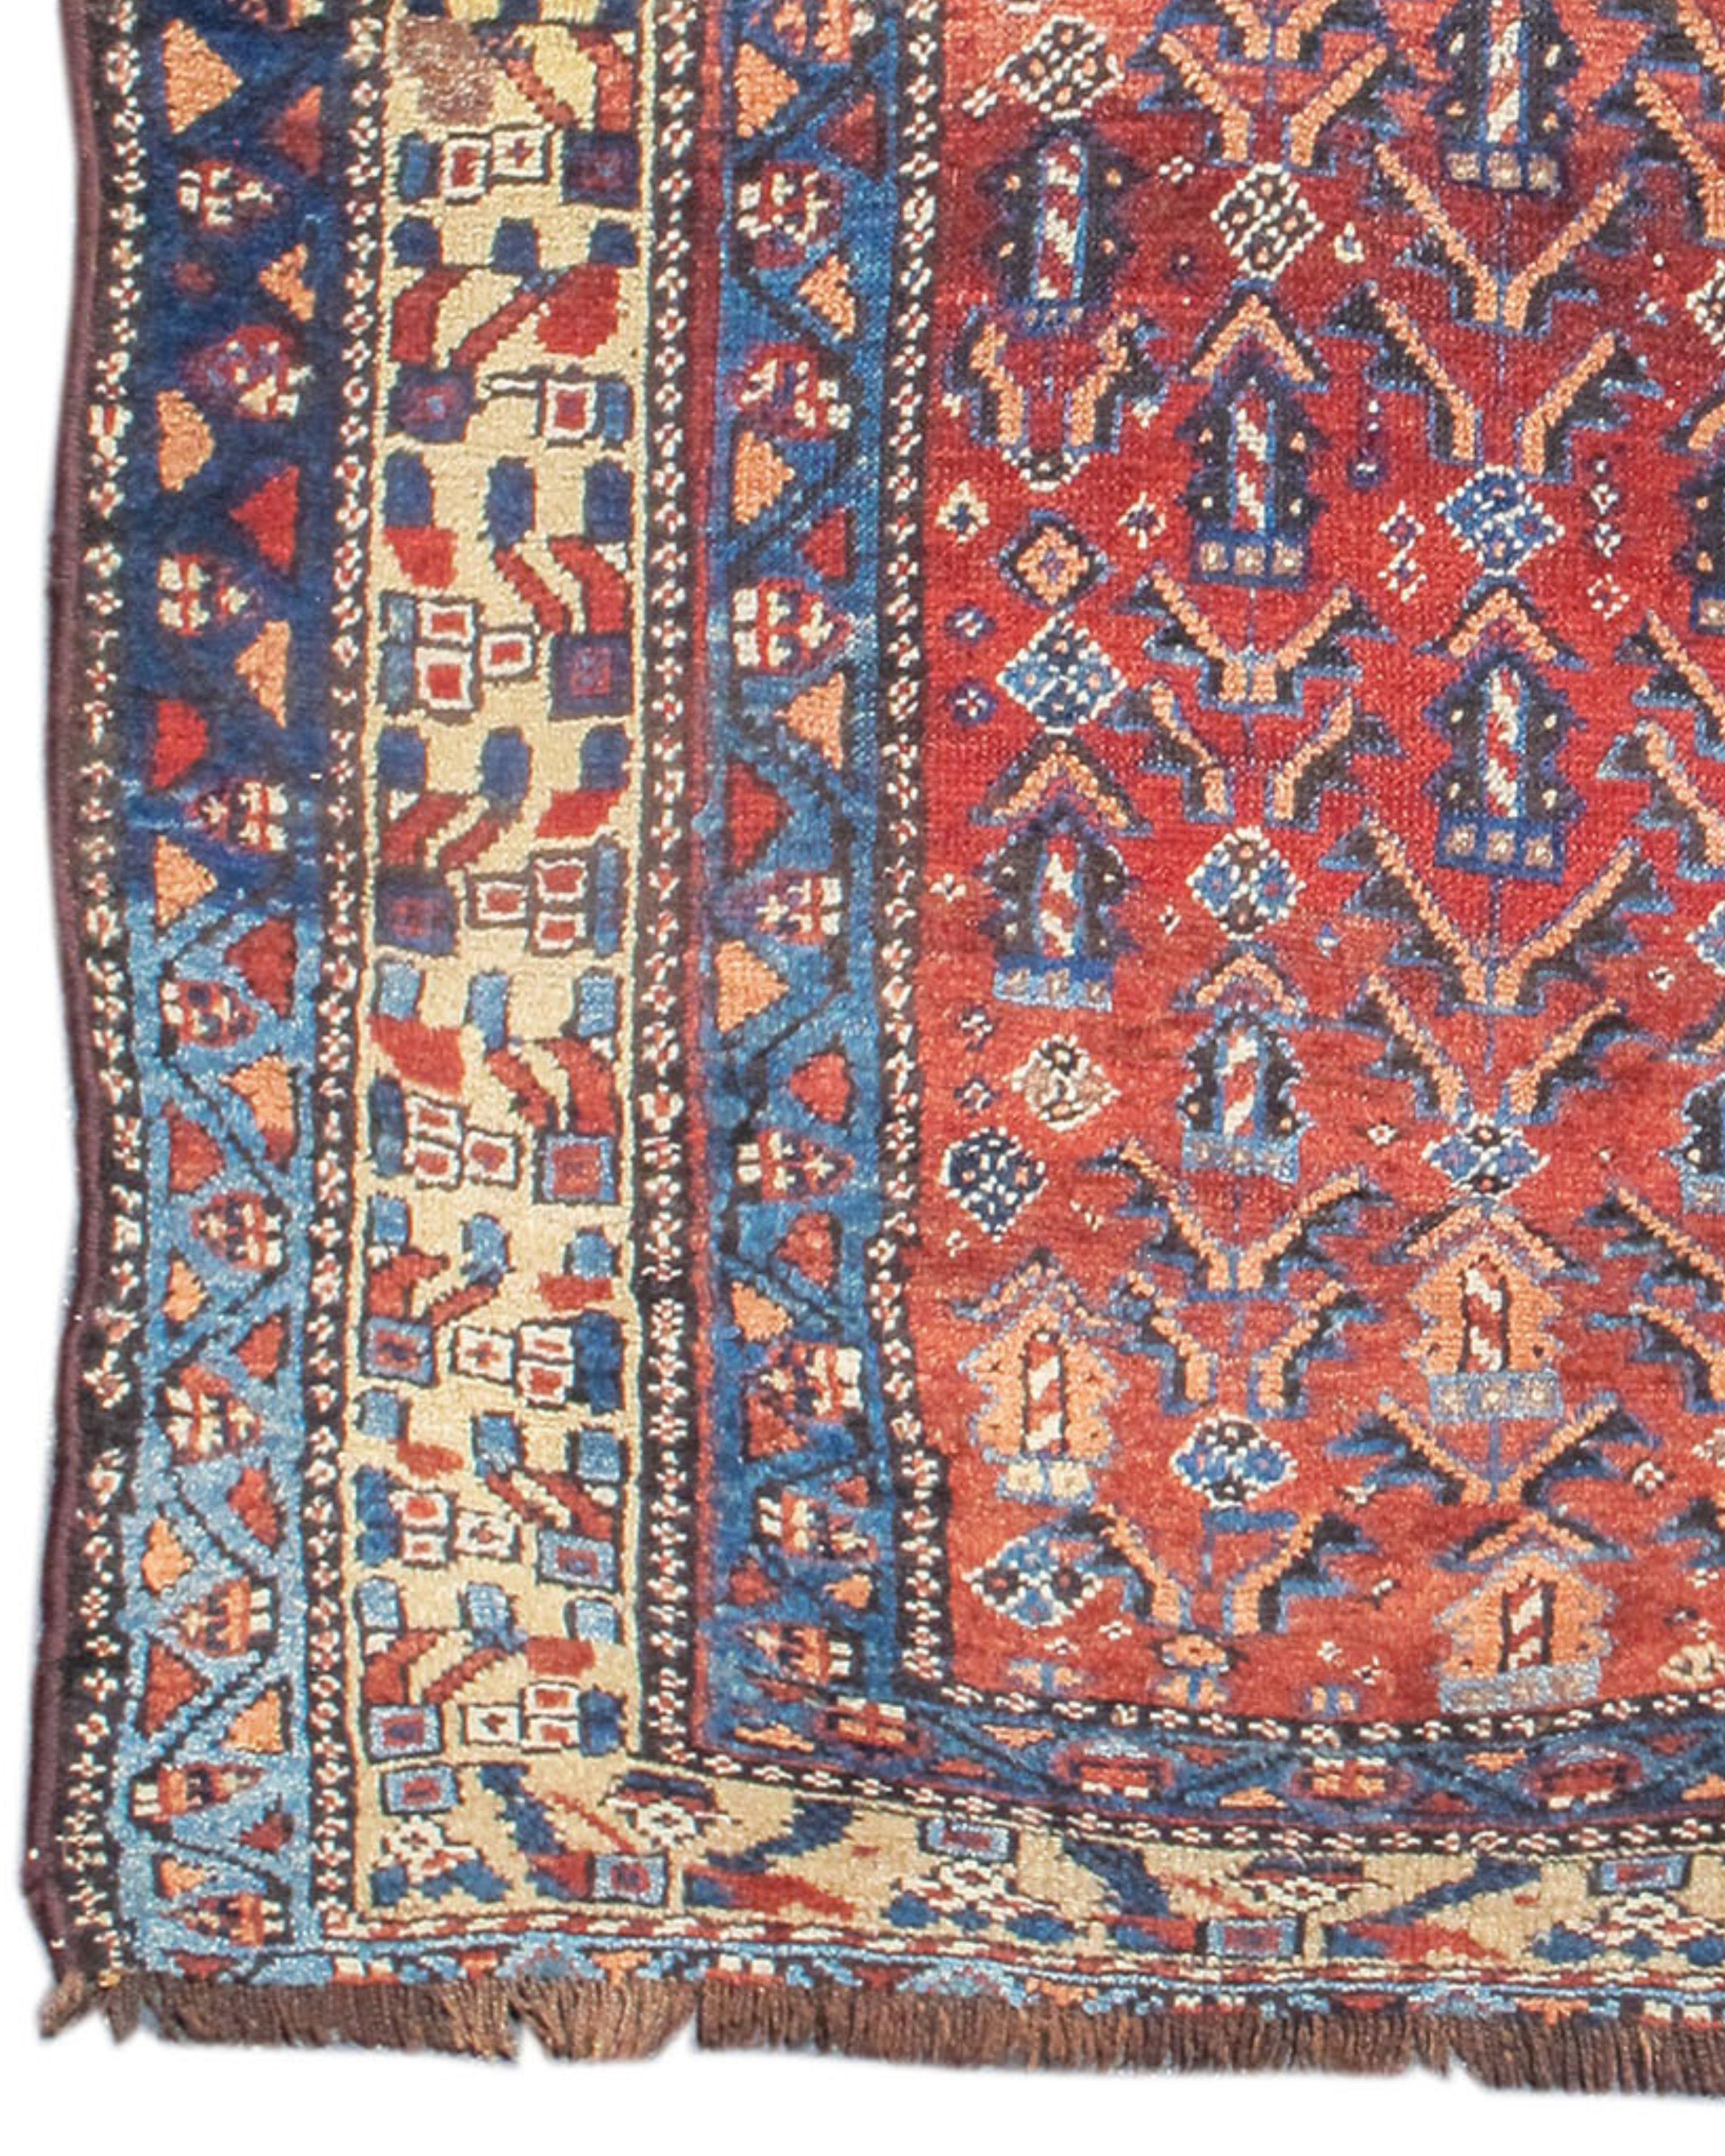 Hand-Knotted Kurdish Rug, c. 1900 For Sale